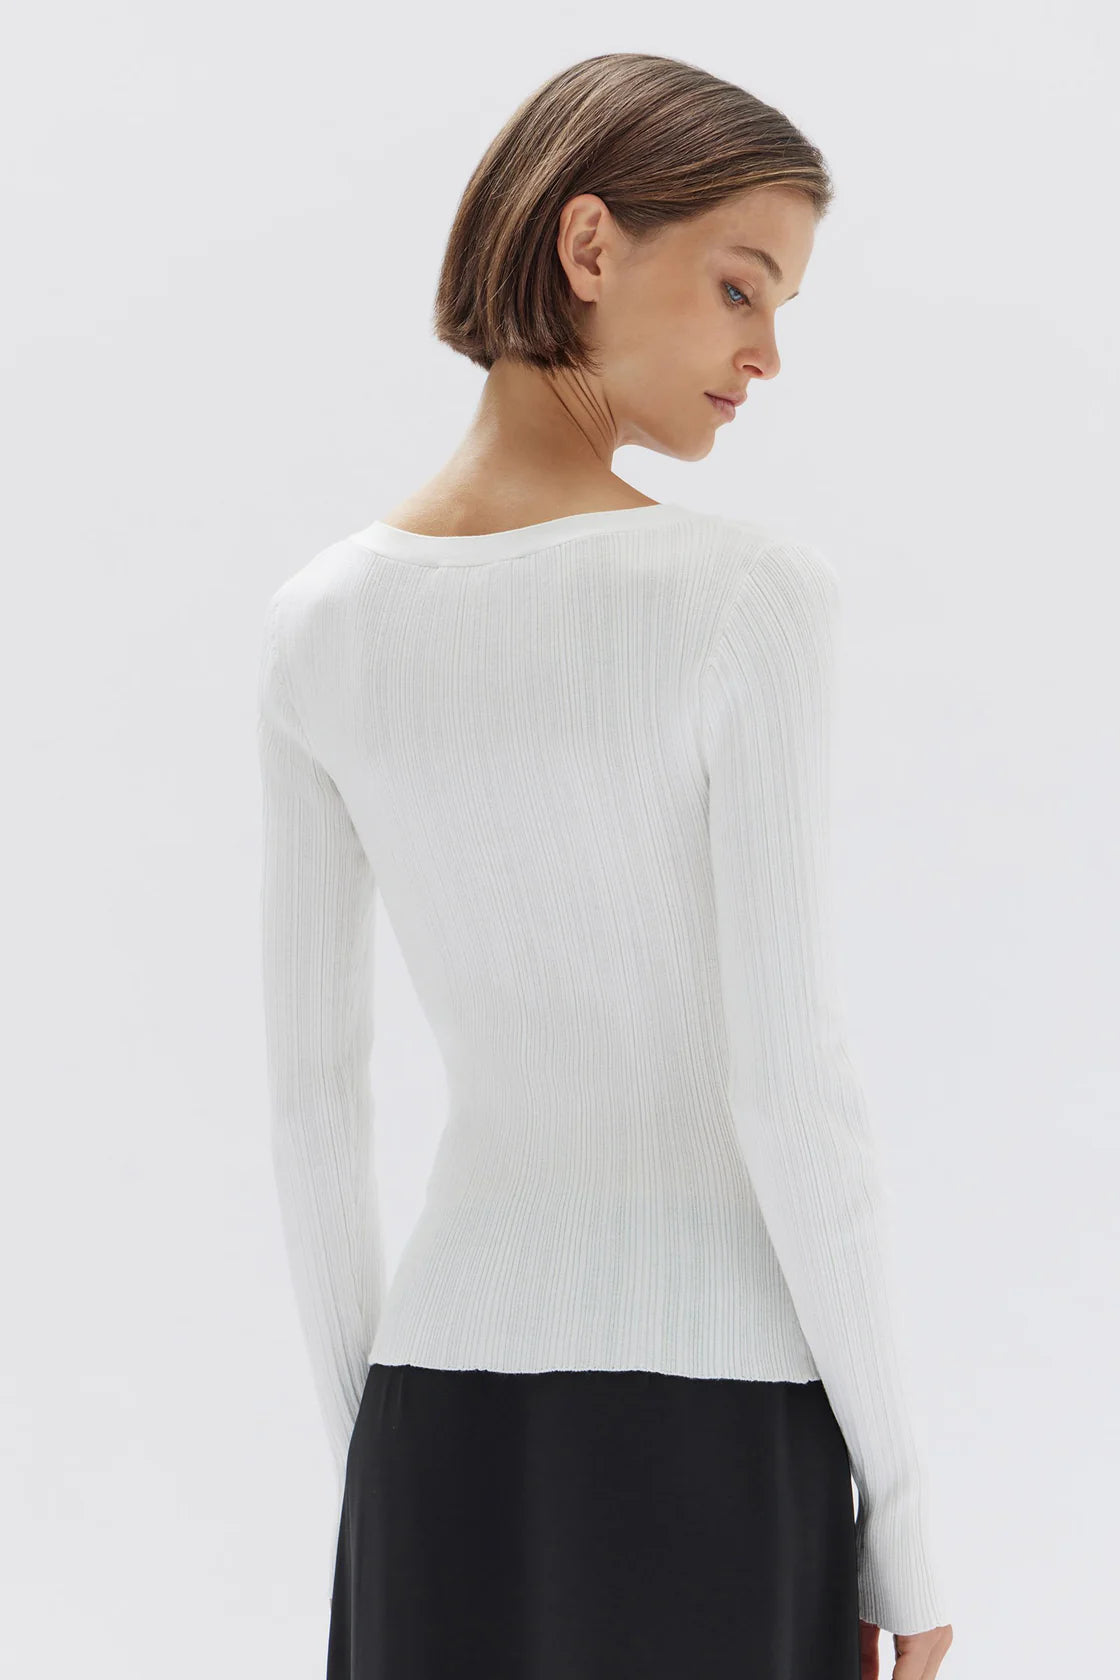 Vienna Knit Long Sleeve Top White